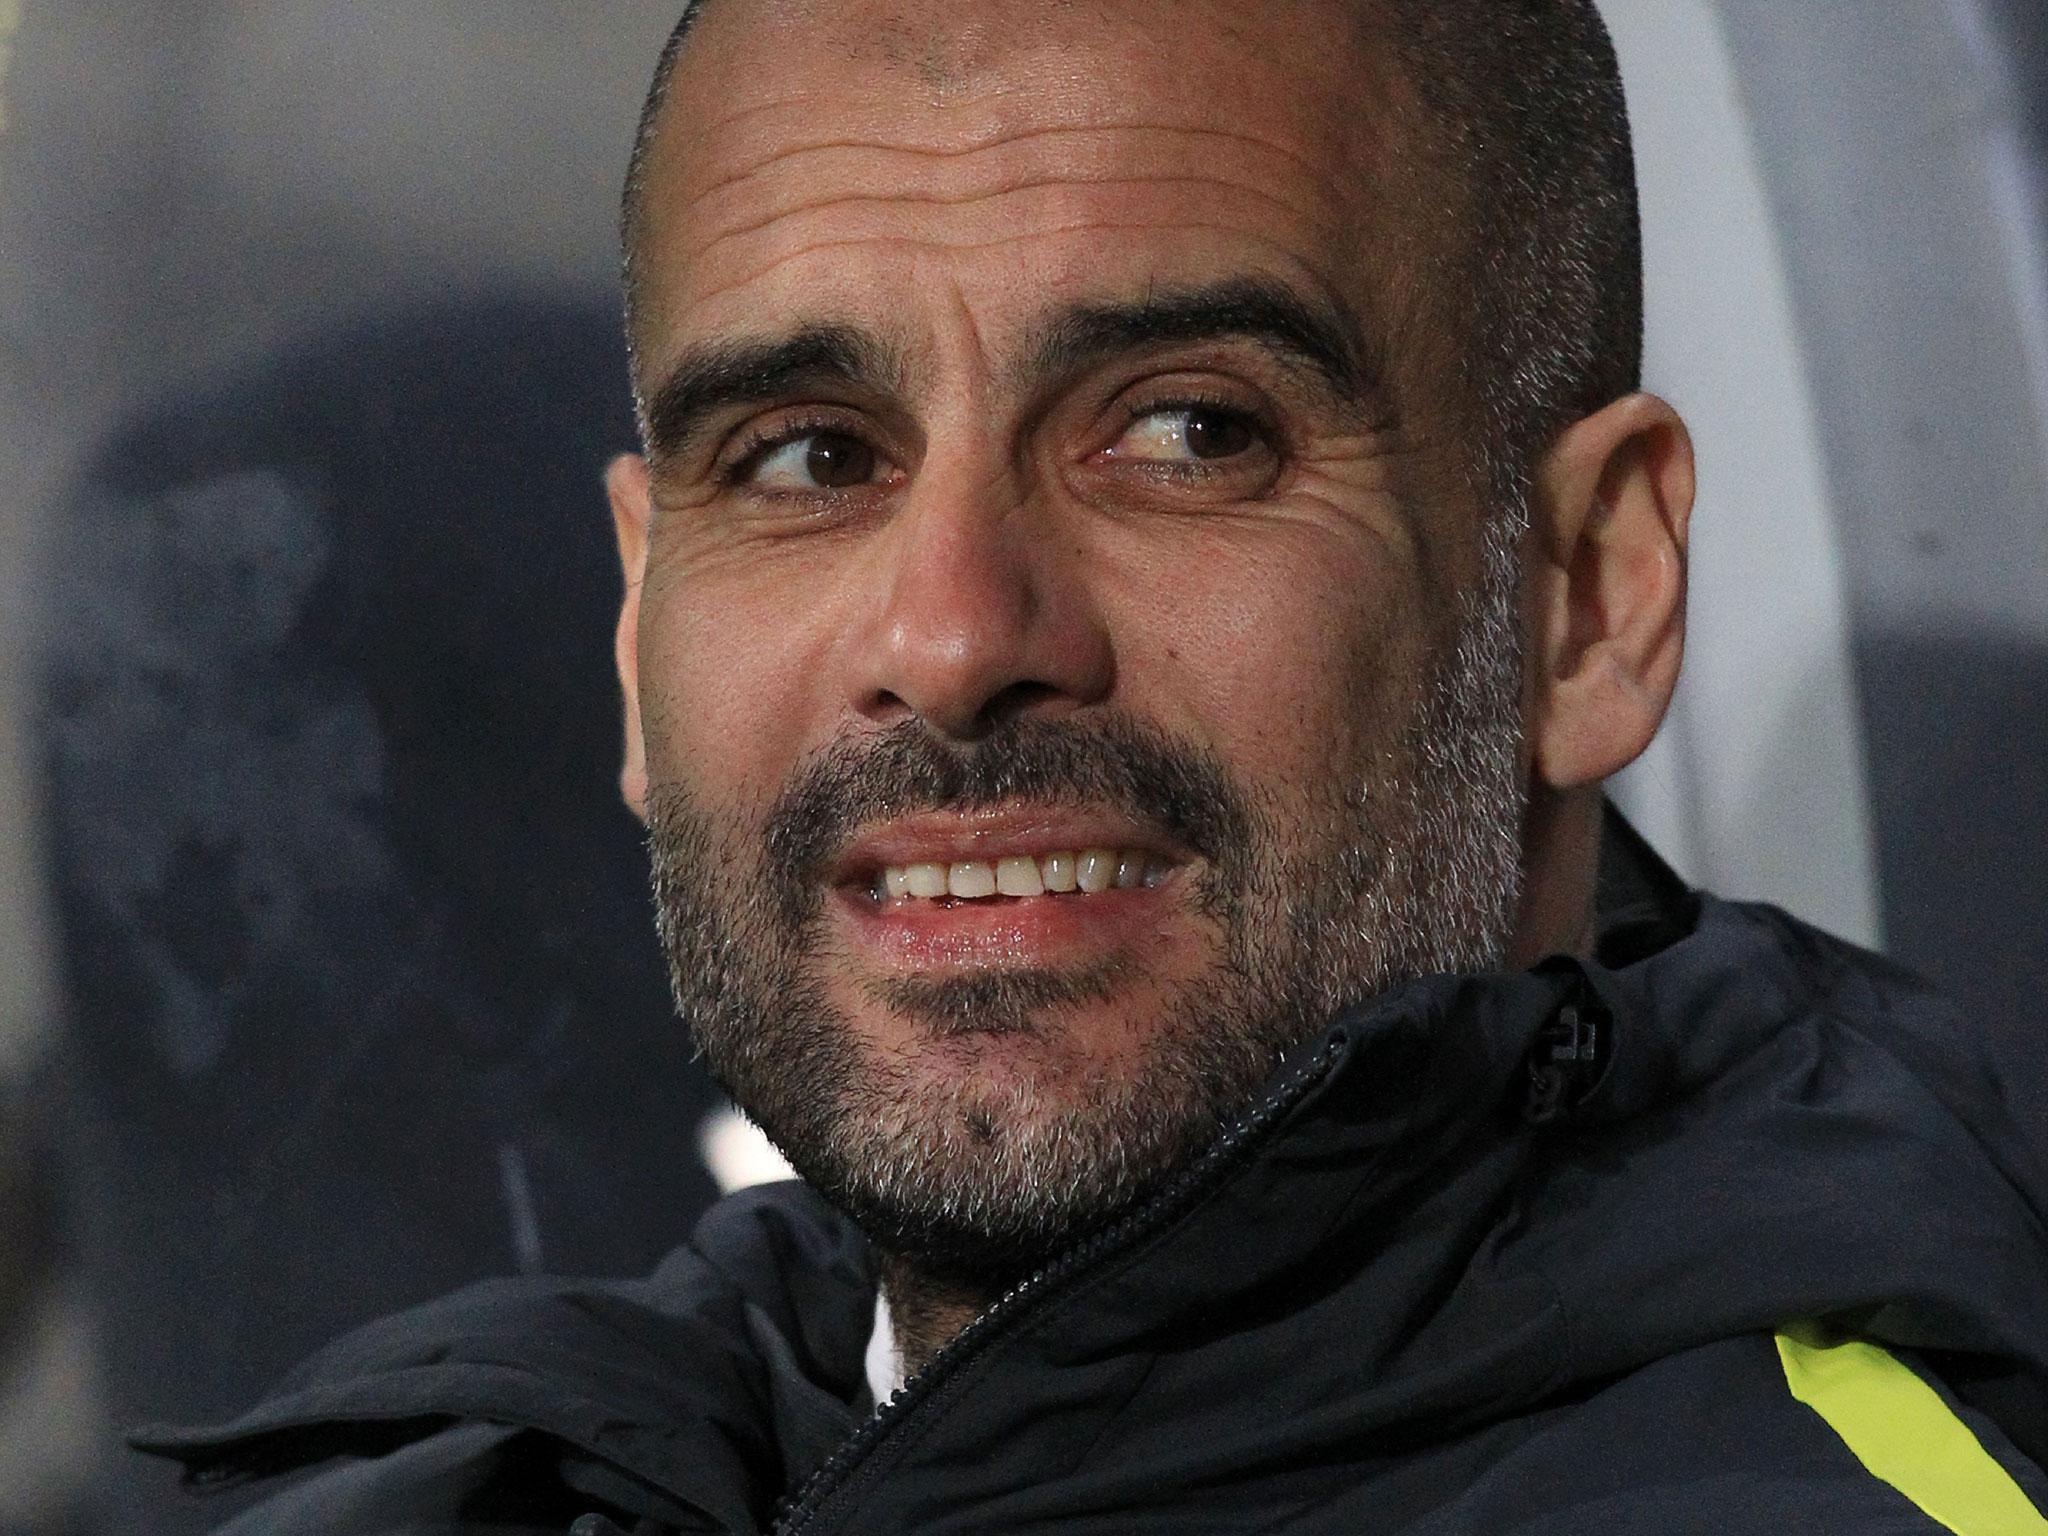 Pep Guardiola has become increasingly tetchy in recent weeks